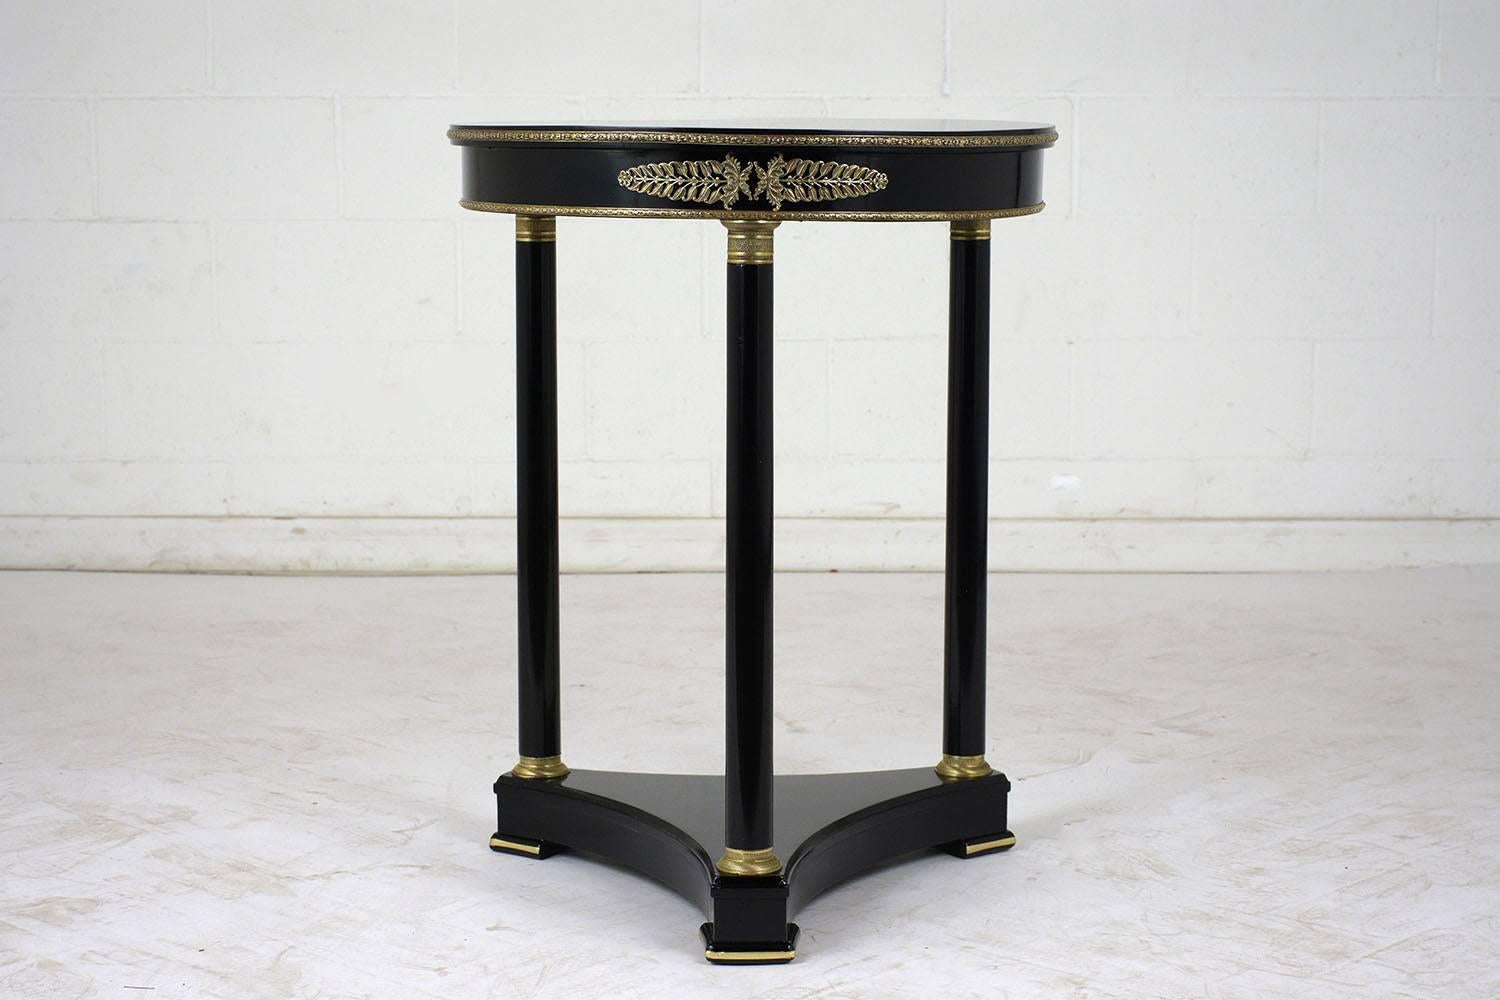 This 1900s French Empire-style round side table is made of mahogany wood with an ebonized and lacquered finish. The table has a triangular pedestal base with simple columns. The table is accented by bronze decorative bands and ormolu accents. This